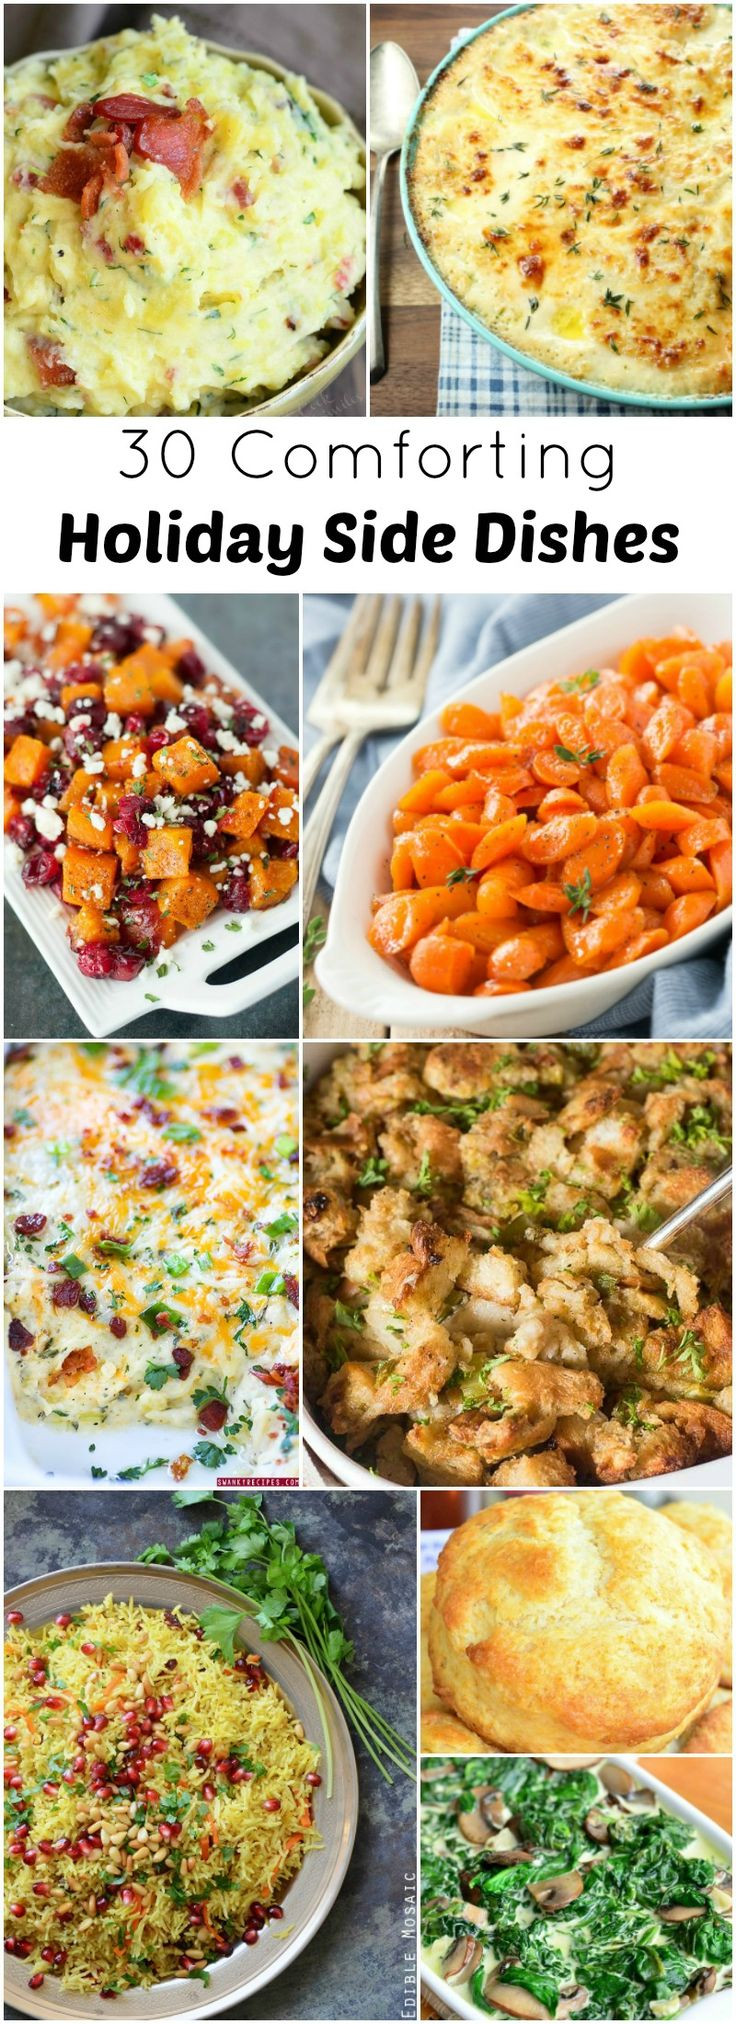 Christmas Side Dishes Recipe
 Best 20 Holiday Side Dishes ideas on Pinterest